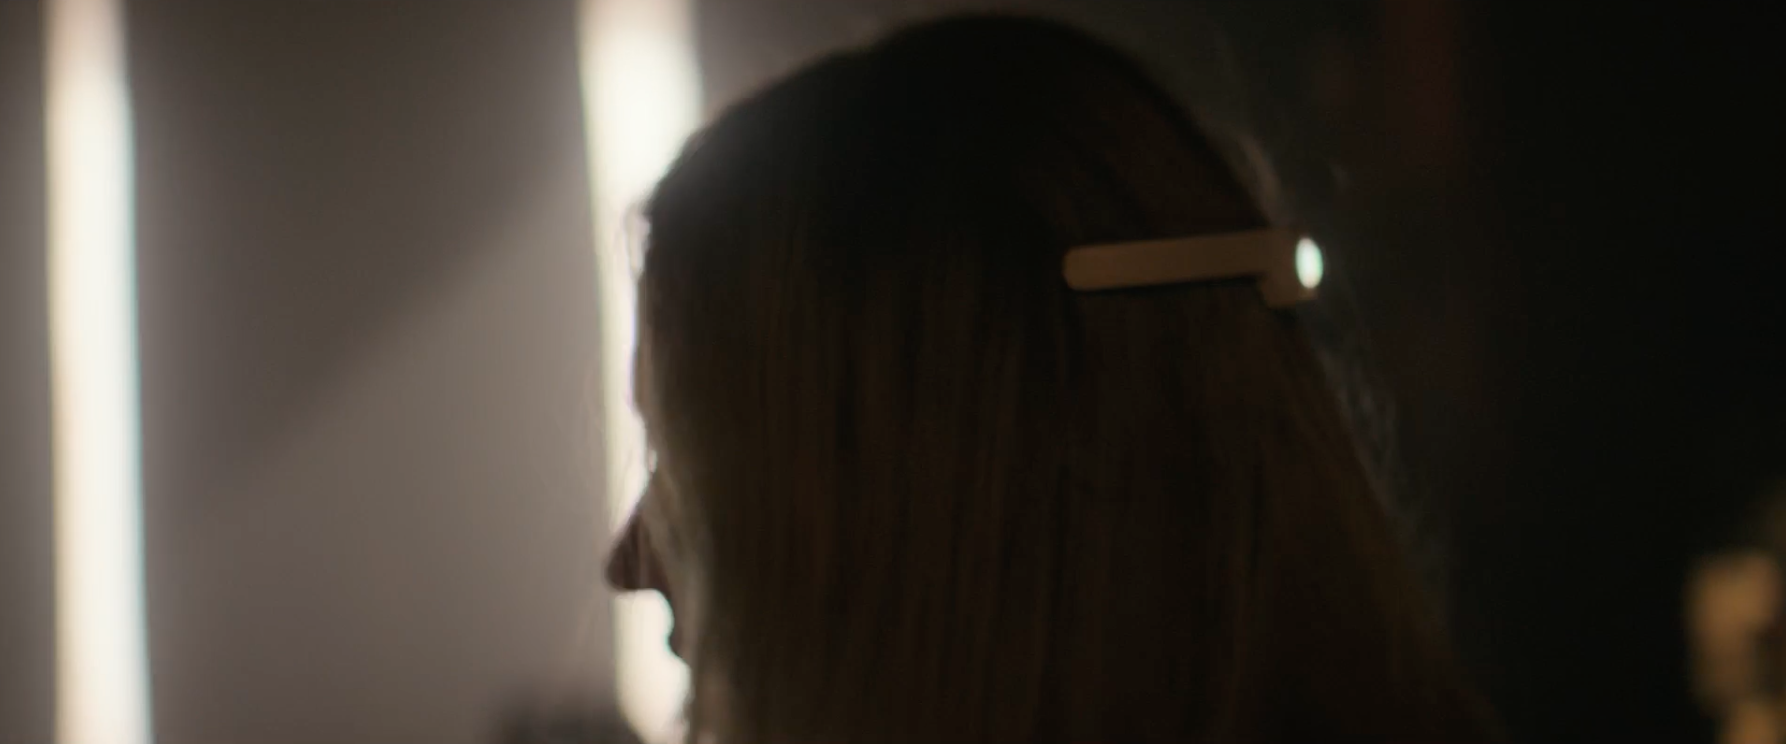 A person with long hair is seen from the side in a dimly lit setting, with a clip visible in their hair. The background is out of focus